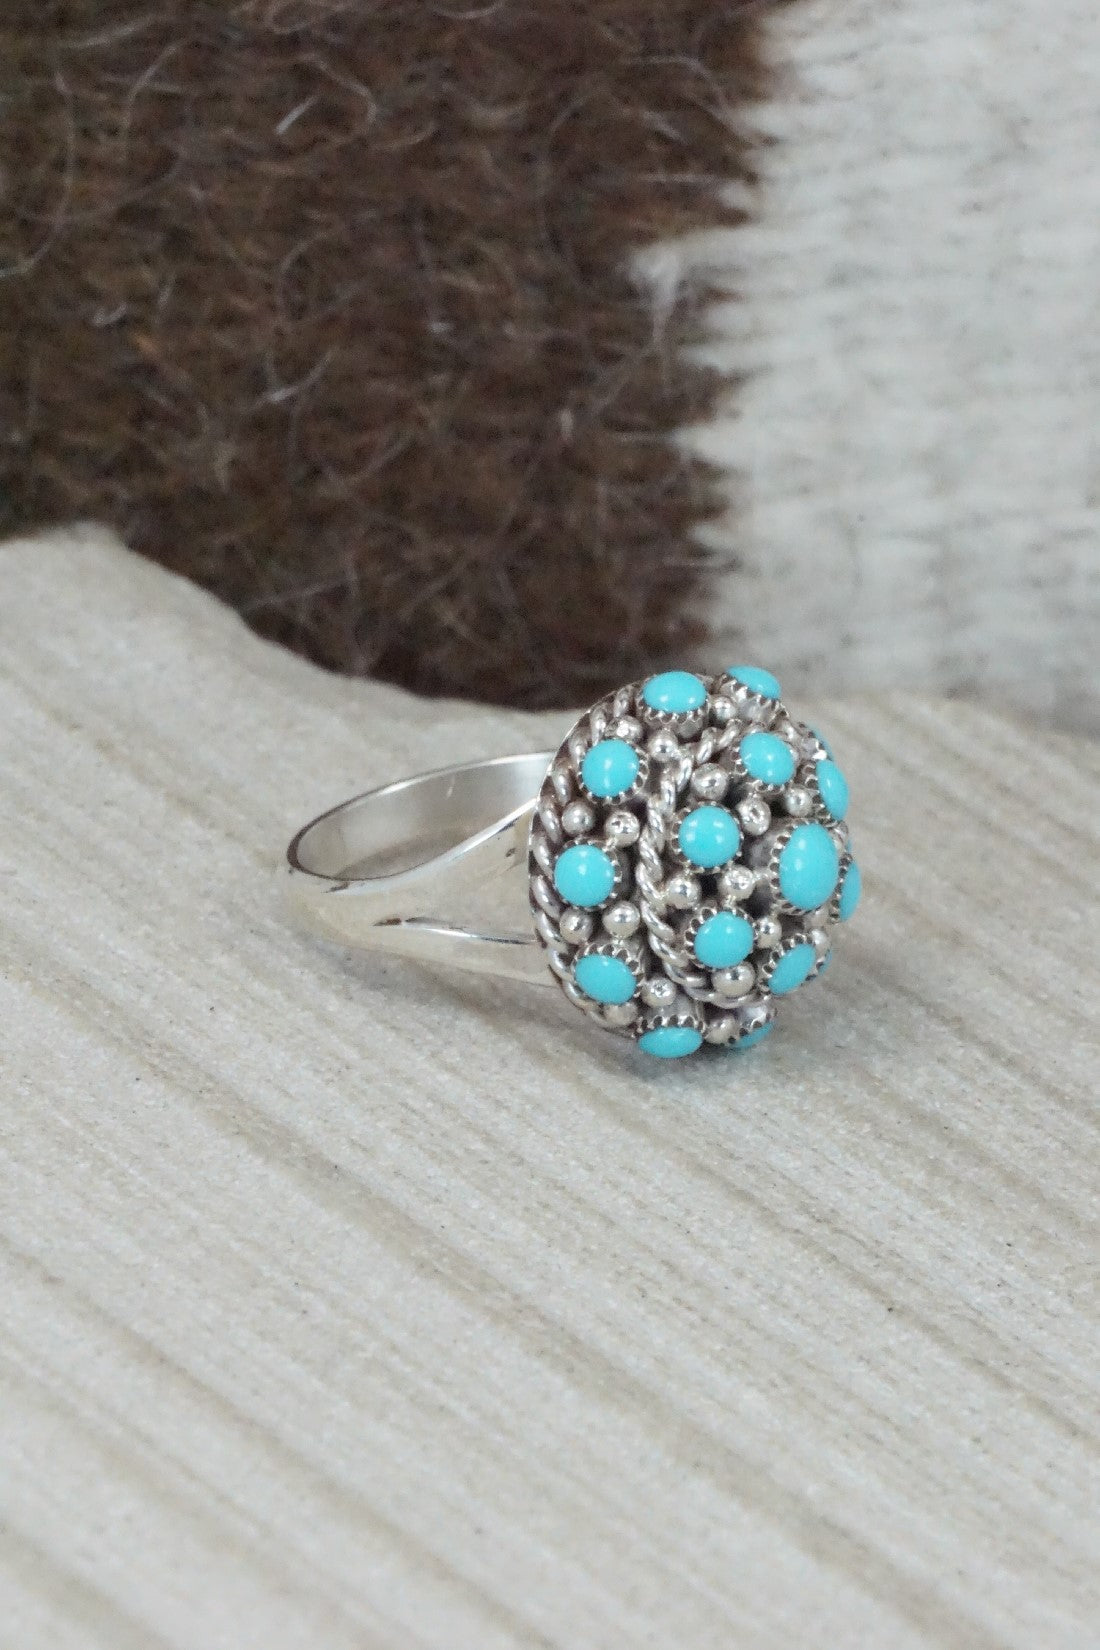 Turquoise & Sterling Silver Ring - Dickie Charlie - Size 6.5